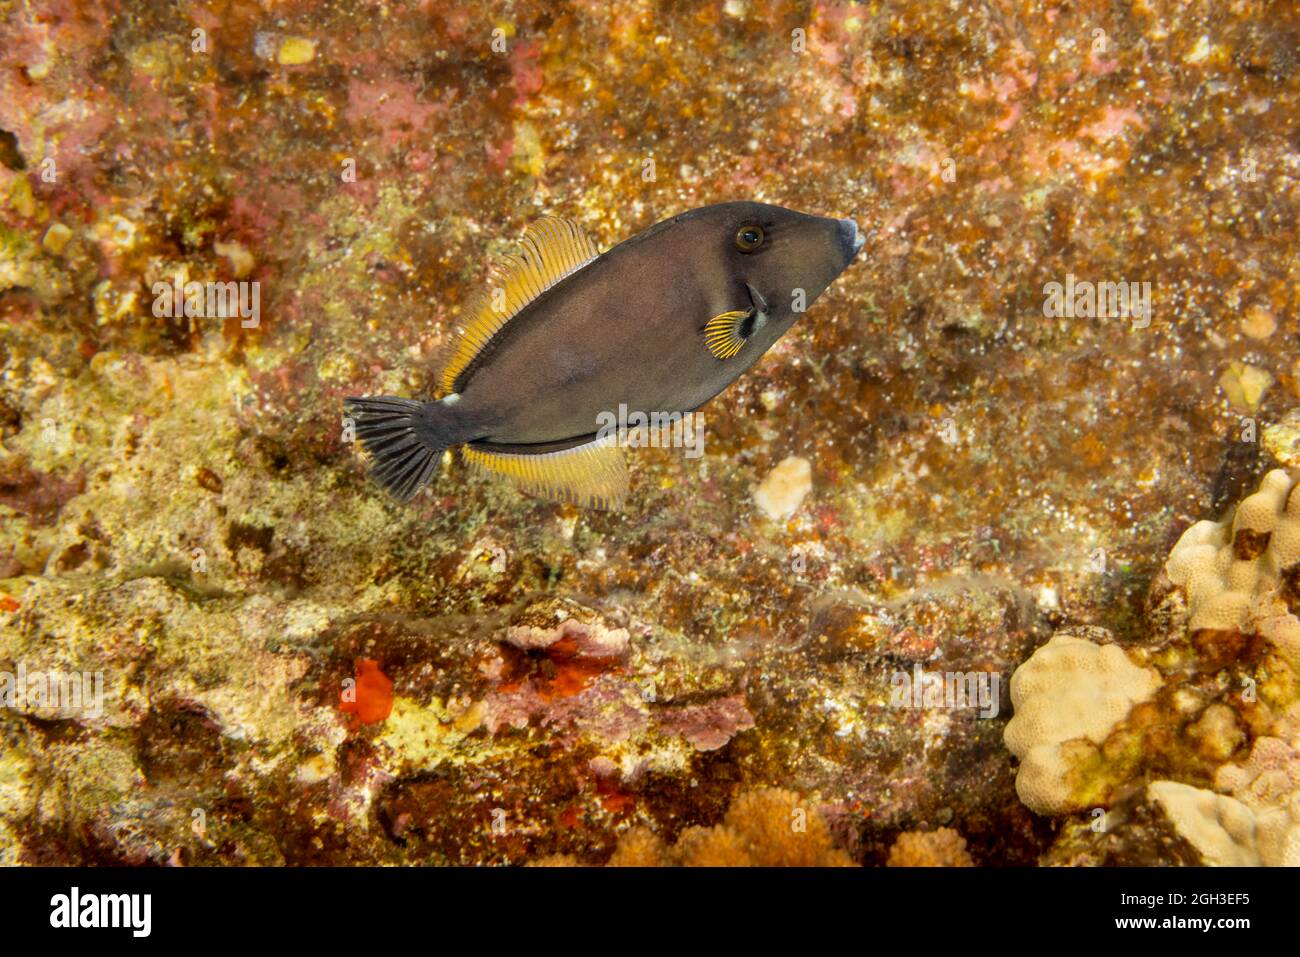 The squaretail filefish, Cantherhines sandwichiensis, was first identified in Hawaii and thought to be endemic. It has since been found in the South P Stock Photo